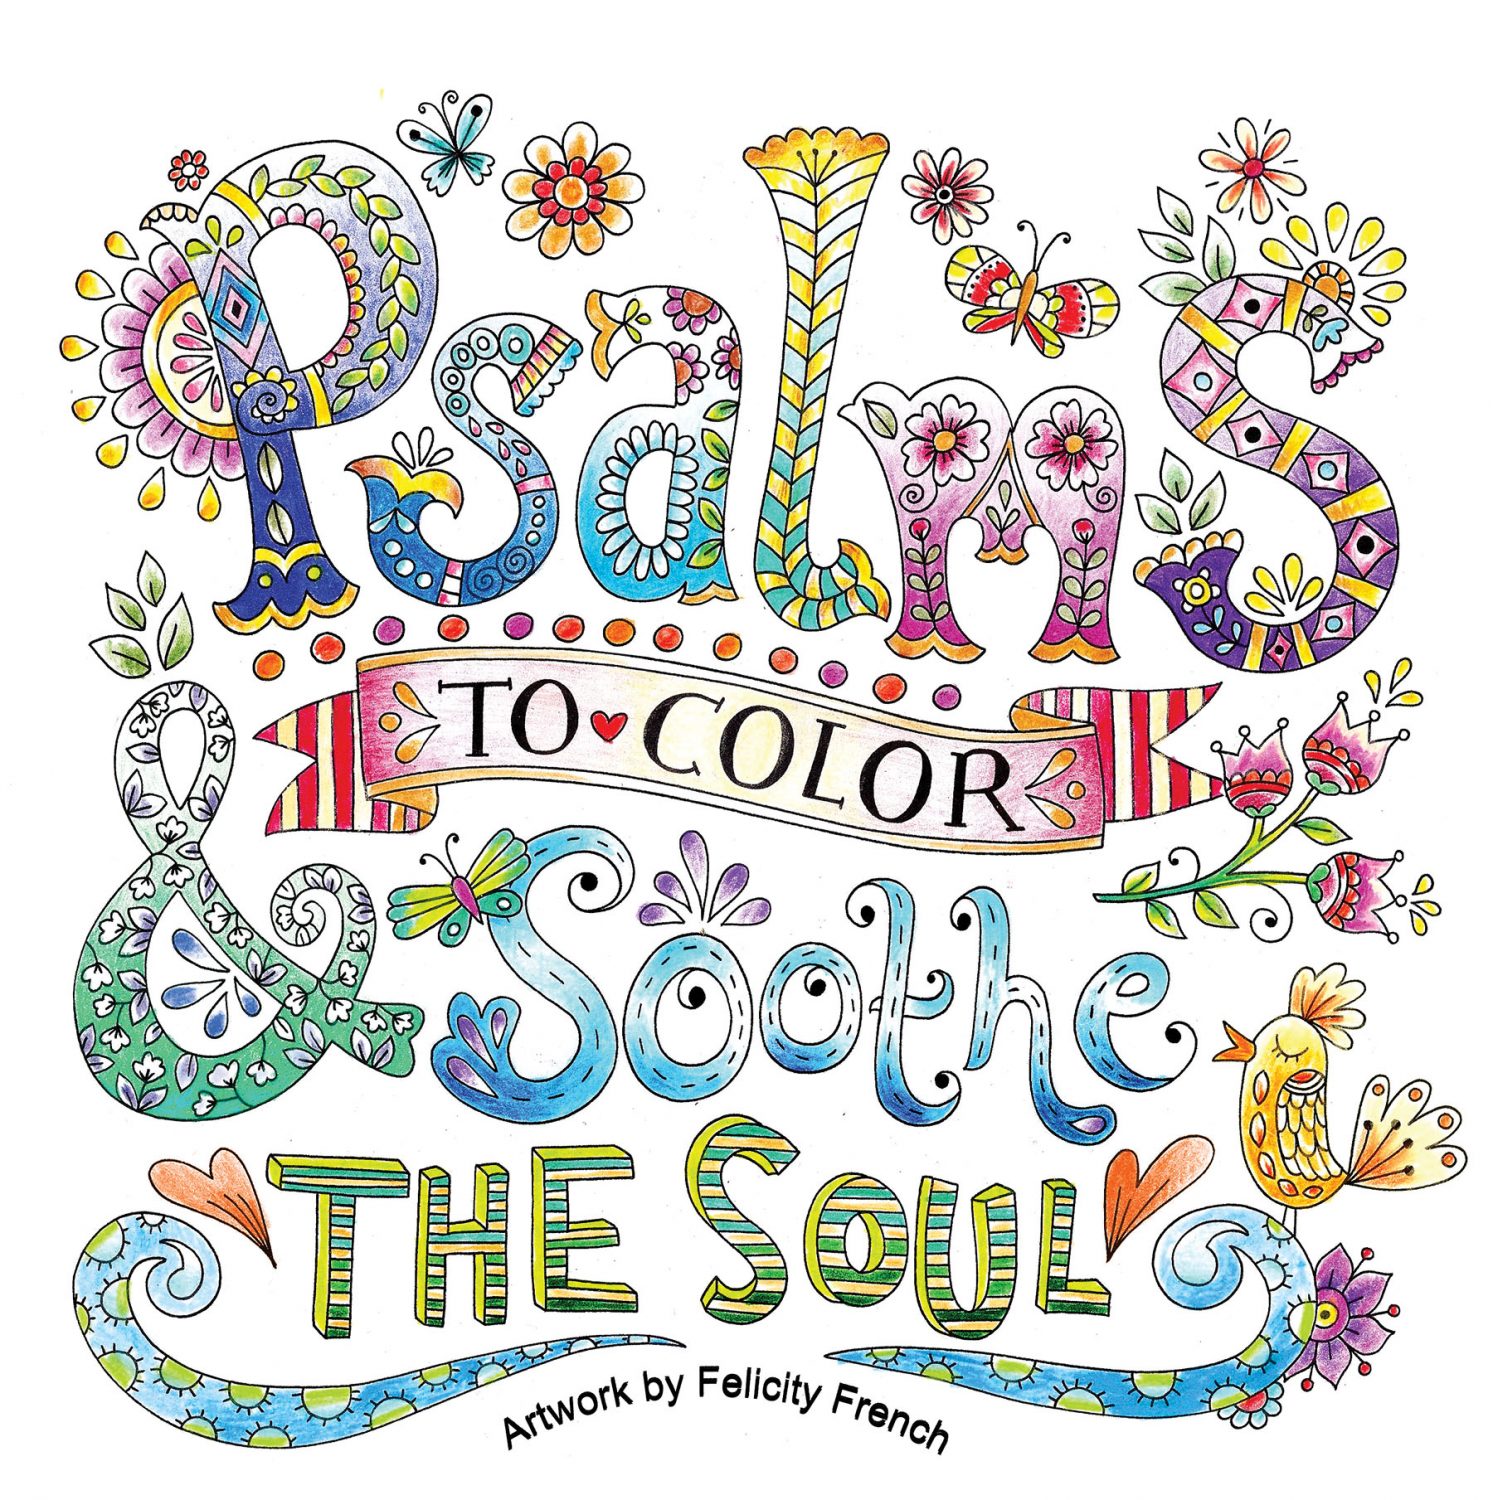 Psalms to Color